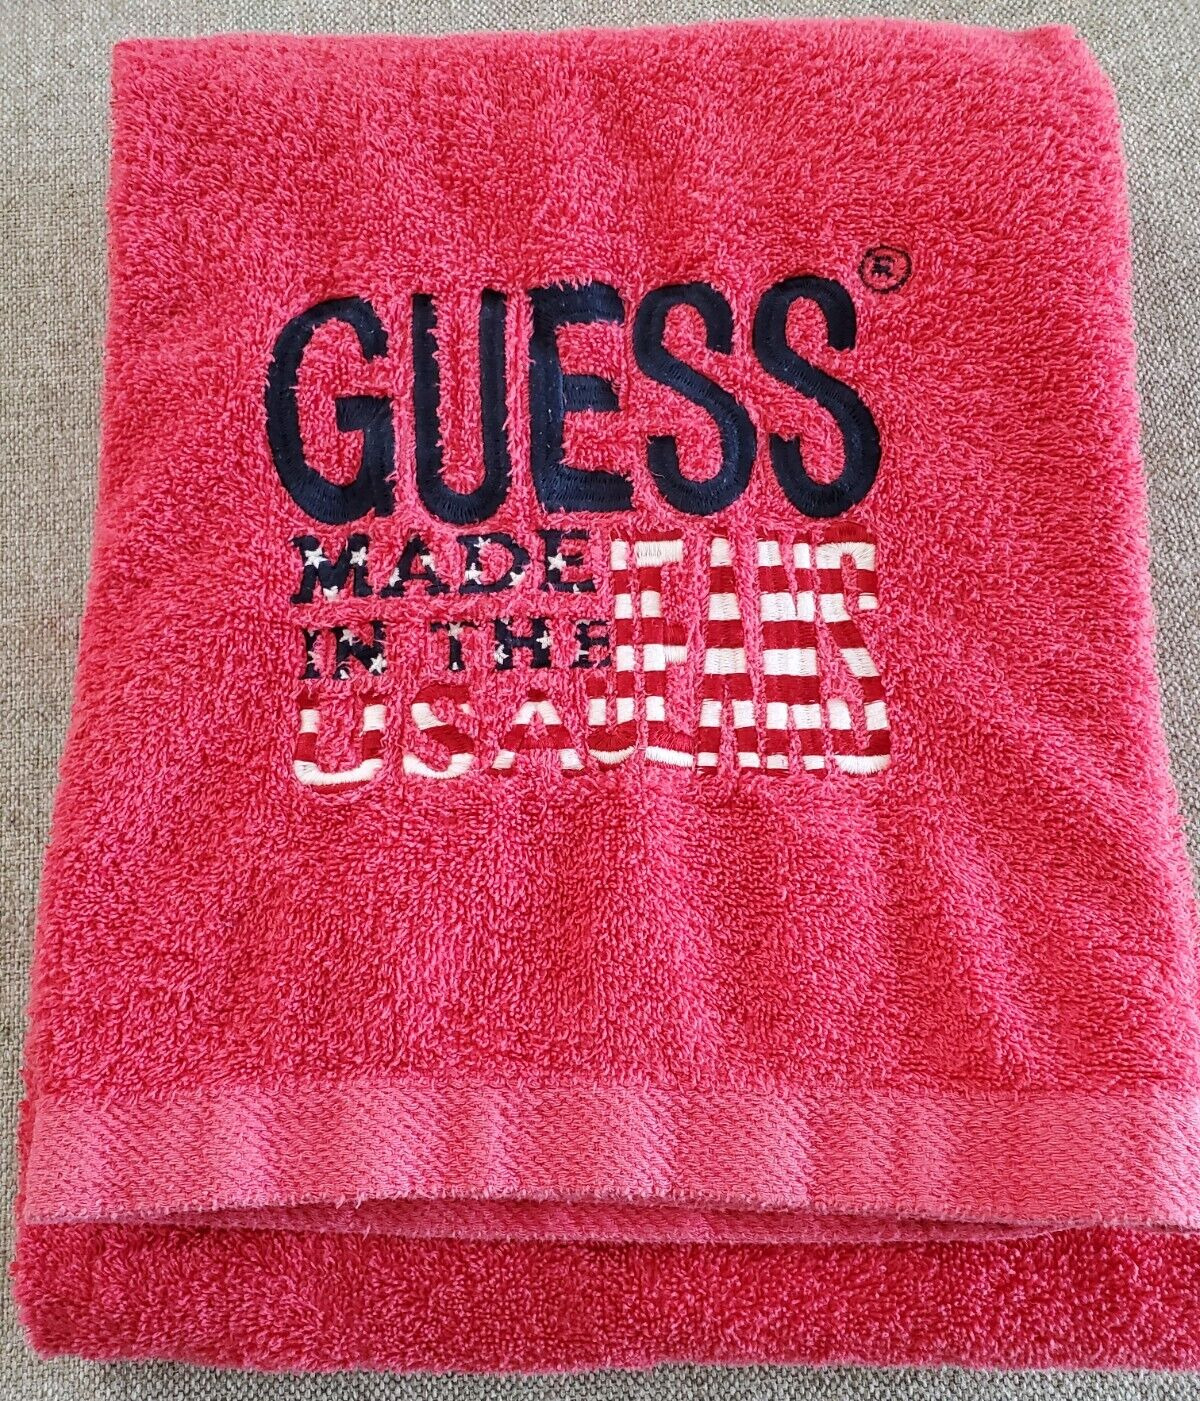 Vintage Guess Jeans Red Bath Beach Towel Made in the USA Large